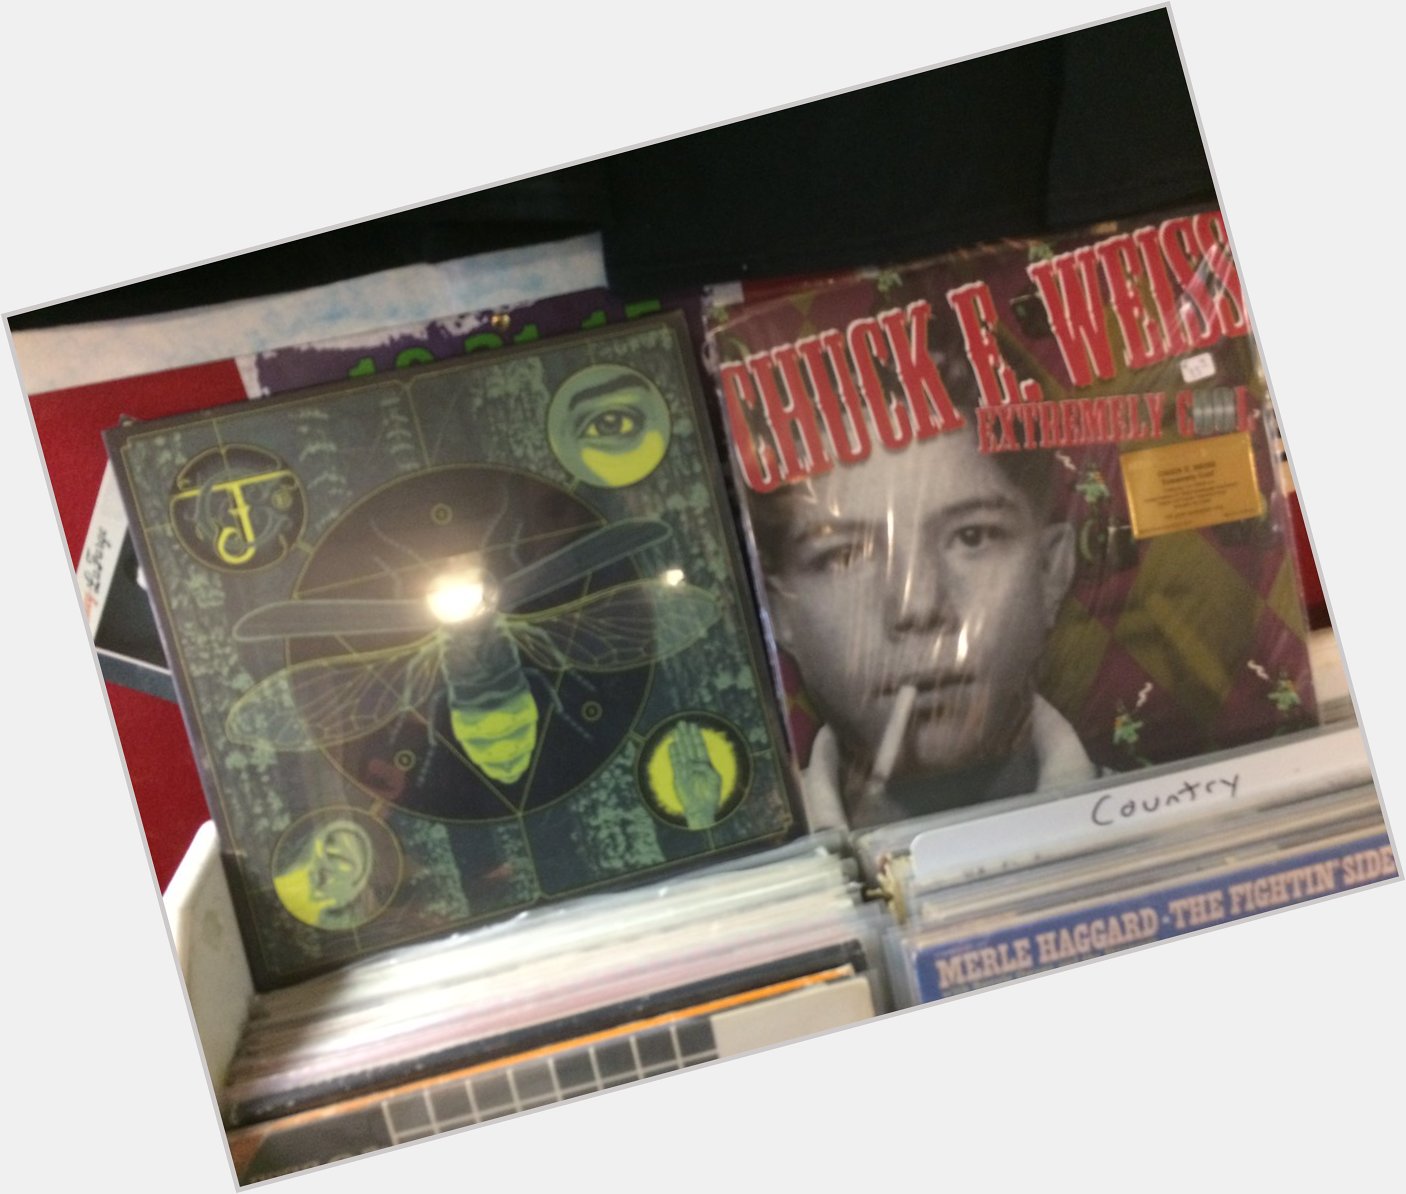 Happy Birthday to Jerry Cantrell (Alice In Chains) & the late Chuck E. Weiss 